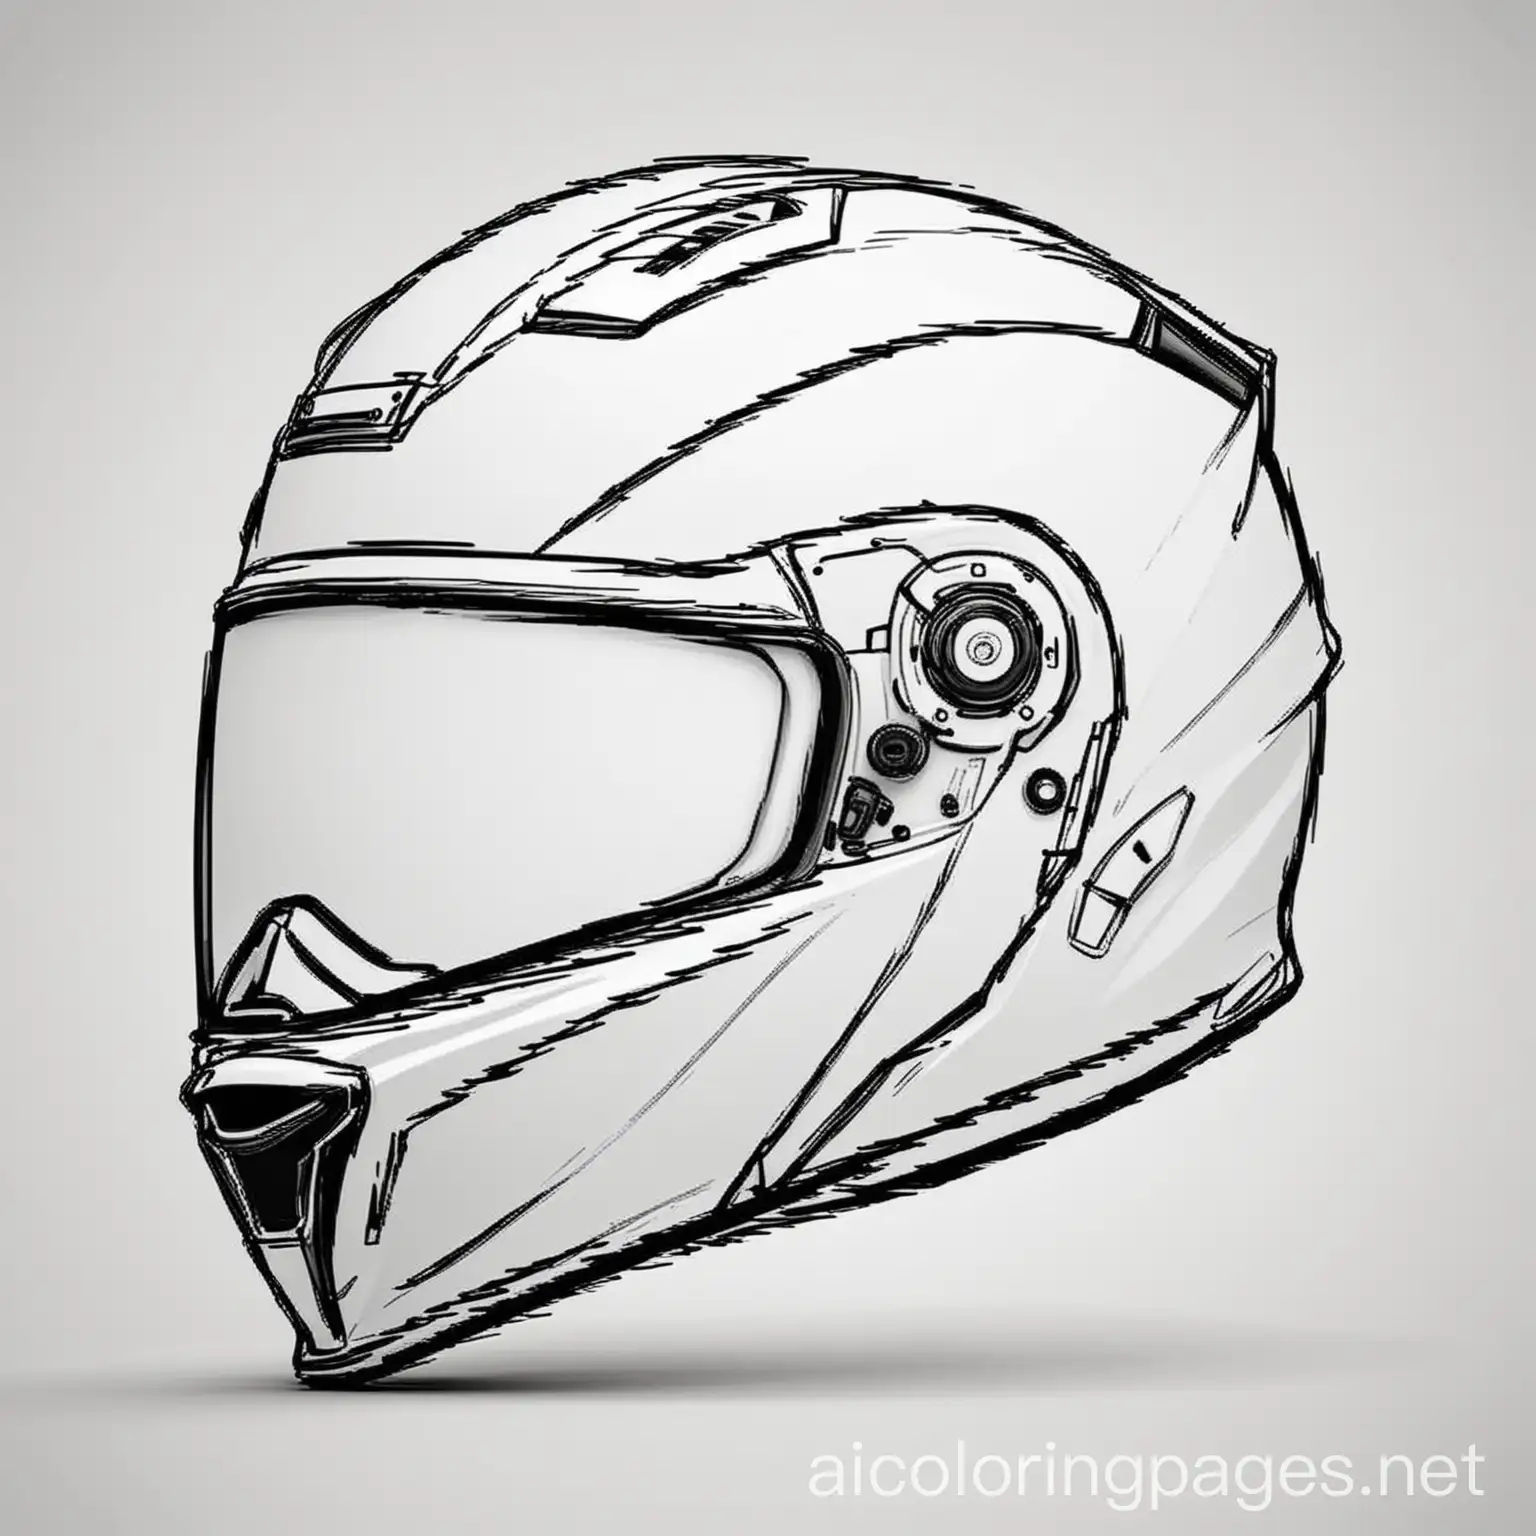 modular motorcycle helmet. coloring page, Coloring Page, black and white, line art, white background, Simplicity, Ample White Space. The background of the coloring page is plain white to make it easy for young children to color within the lines. The outlines of all the subjects are easy to distinguish, making it simple for kids to color without too much difficulty